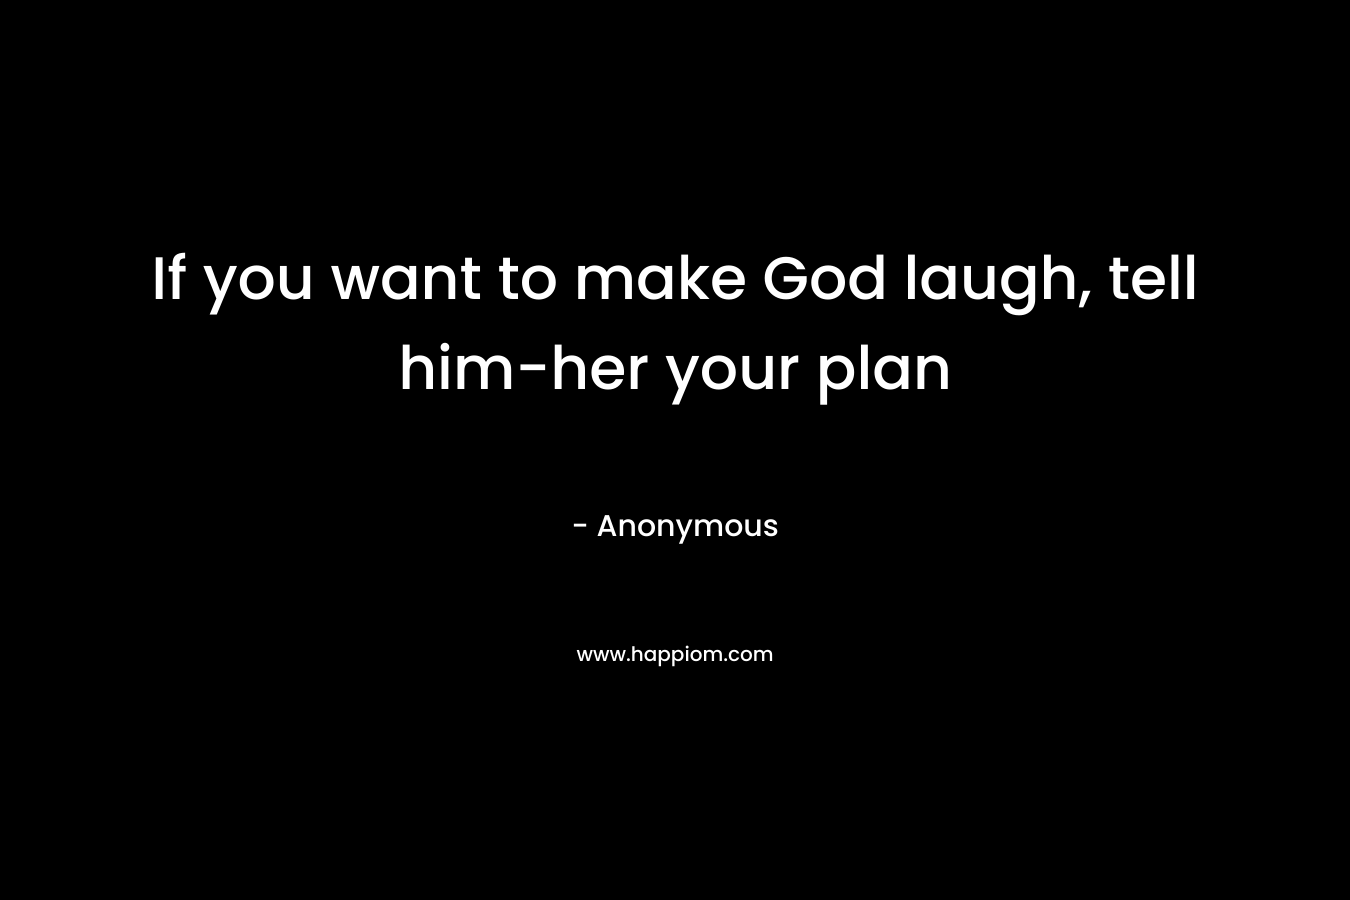 If you want to make God laugh, tell him-her your plan – Anonymous